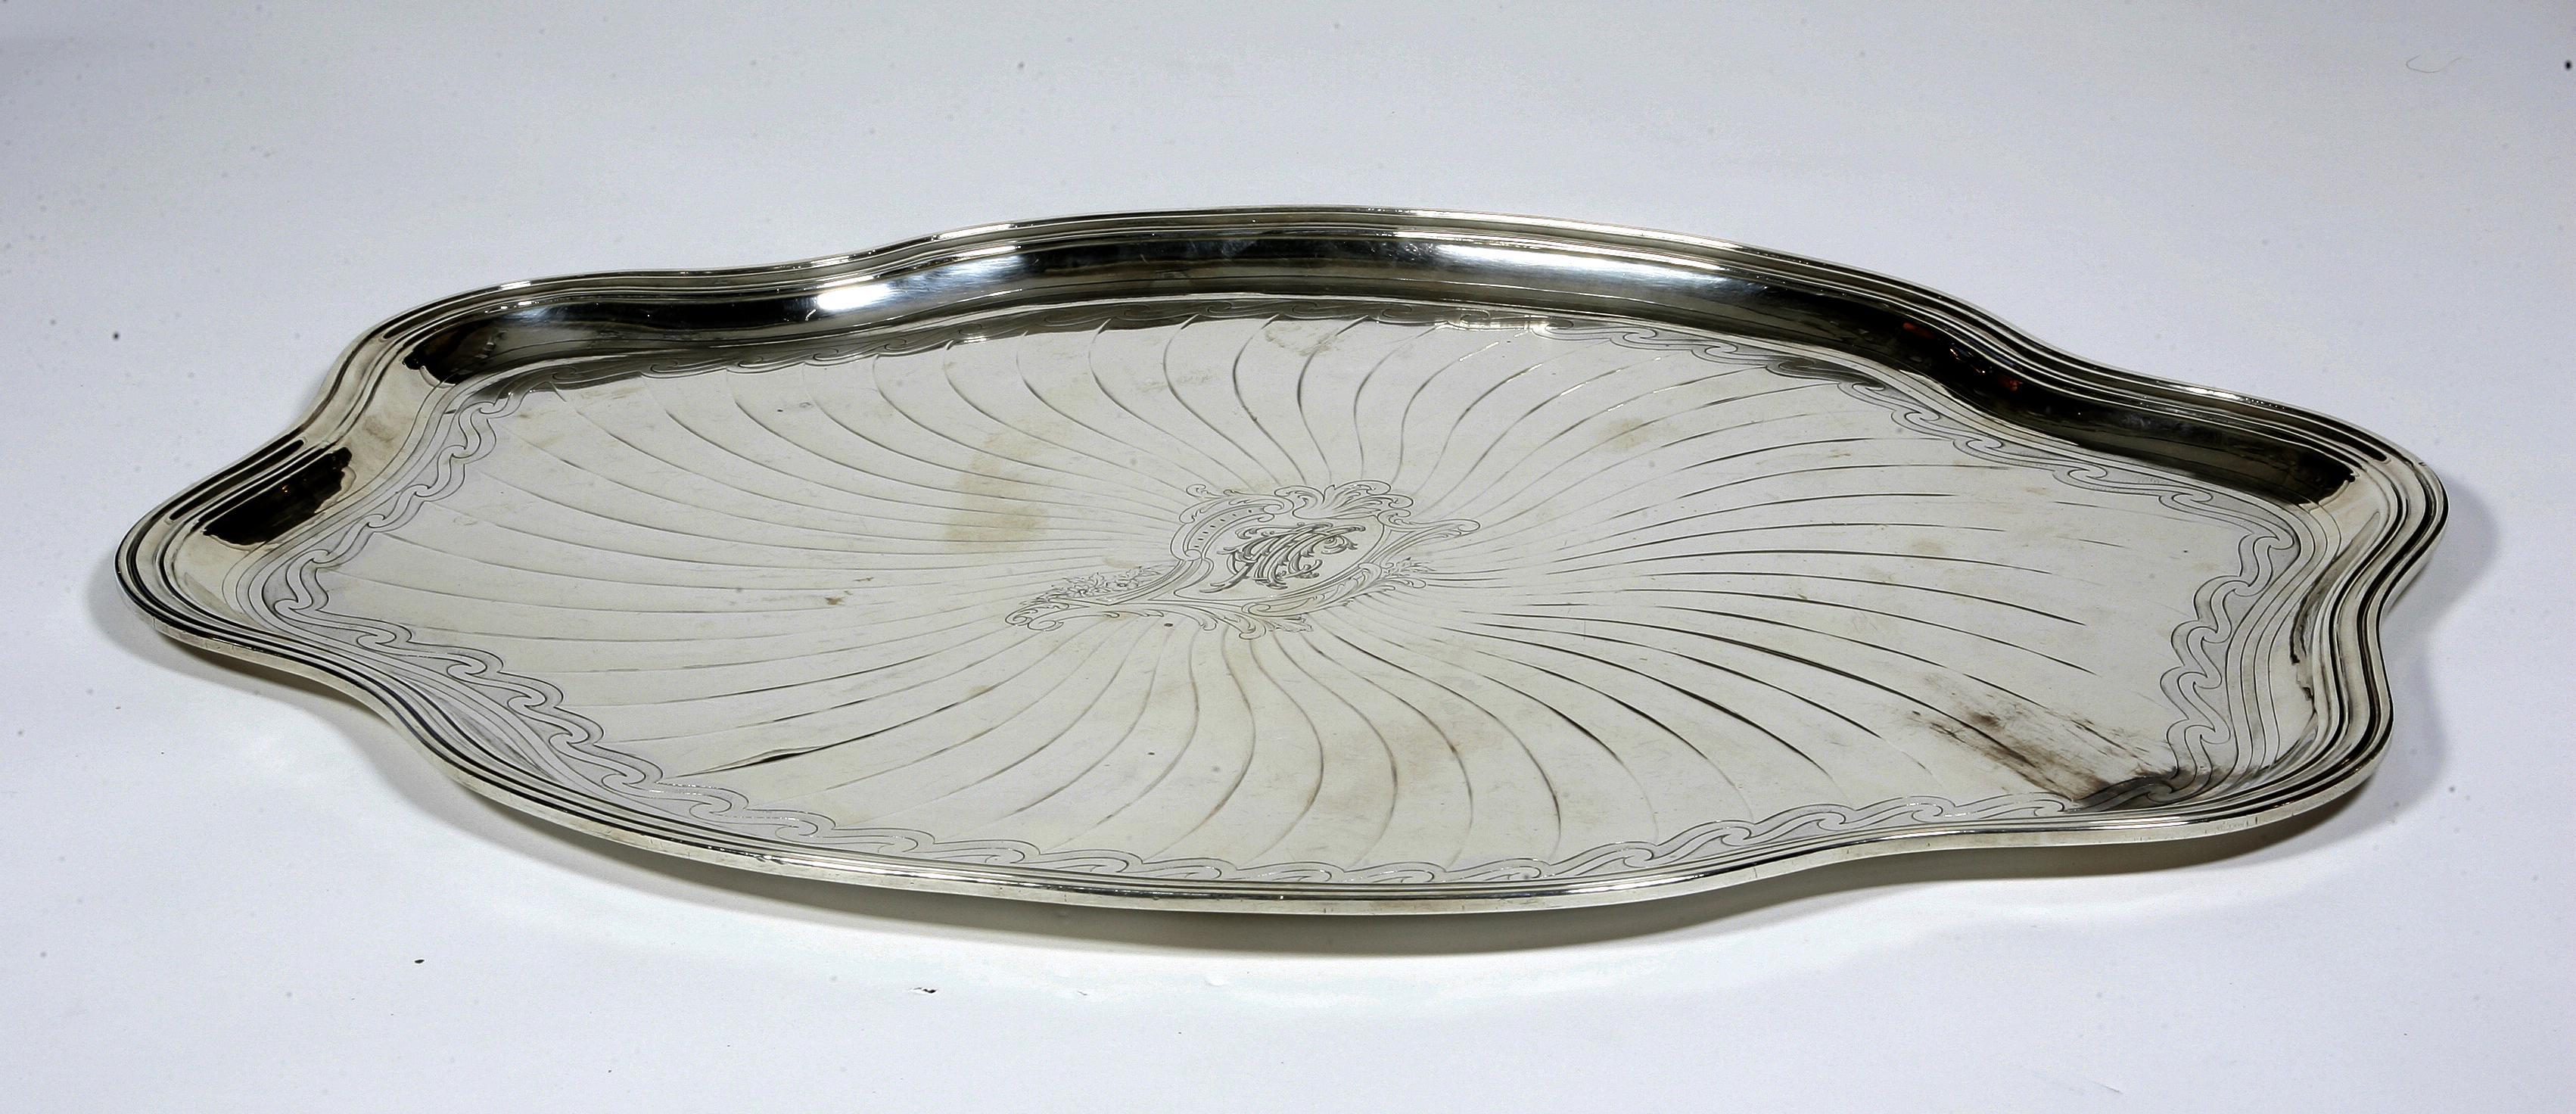 Large oval scalloped platter in solid silver with a belt of strong threads radiating decoration, in the center a stylized cartridge with an interlaced 